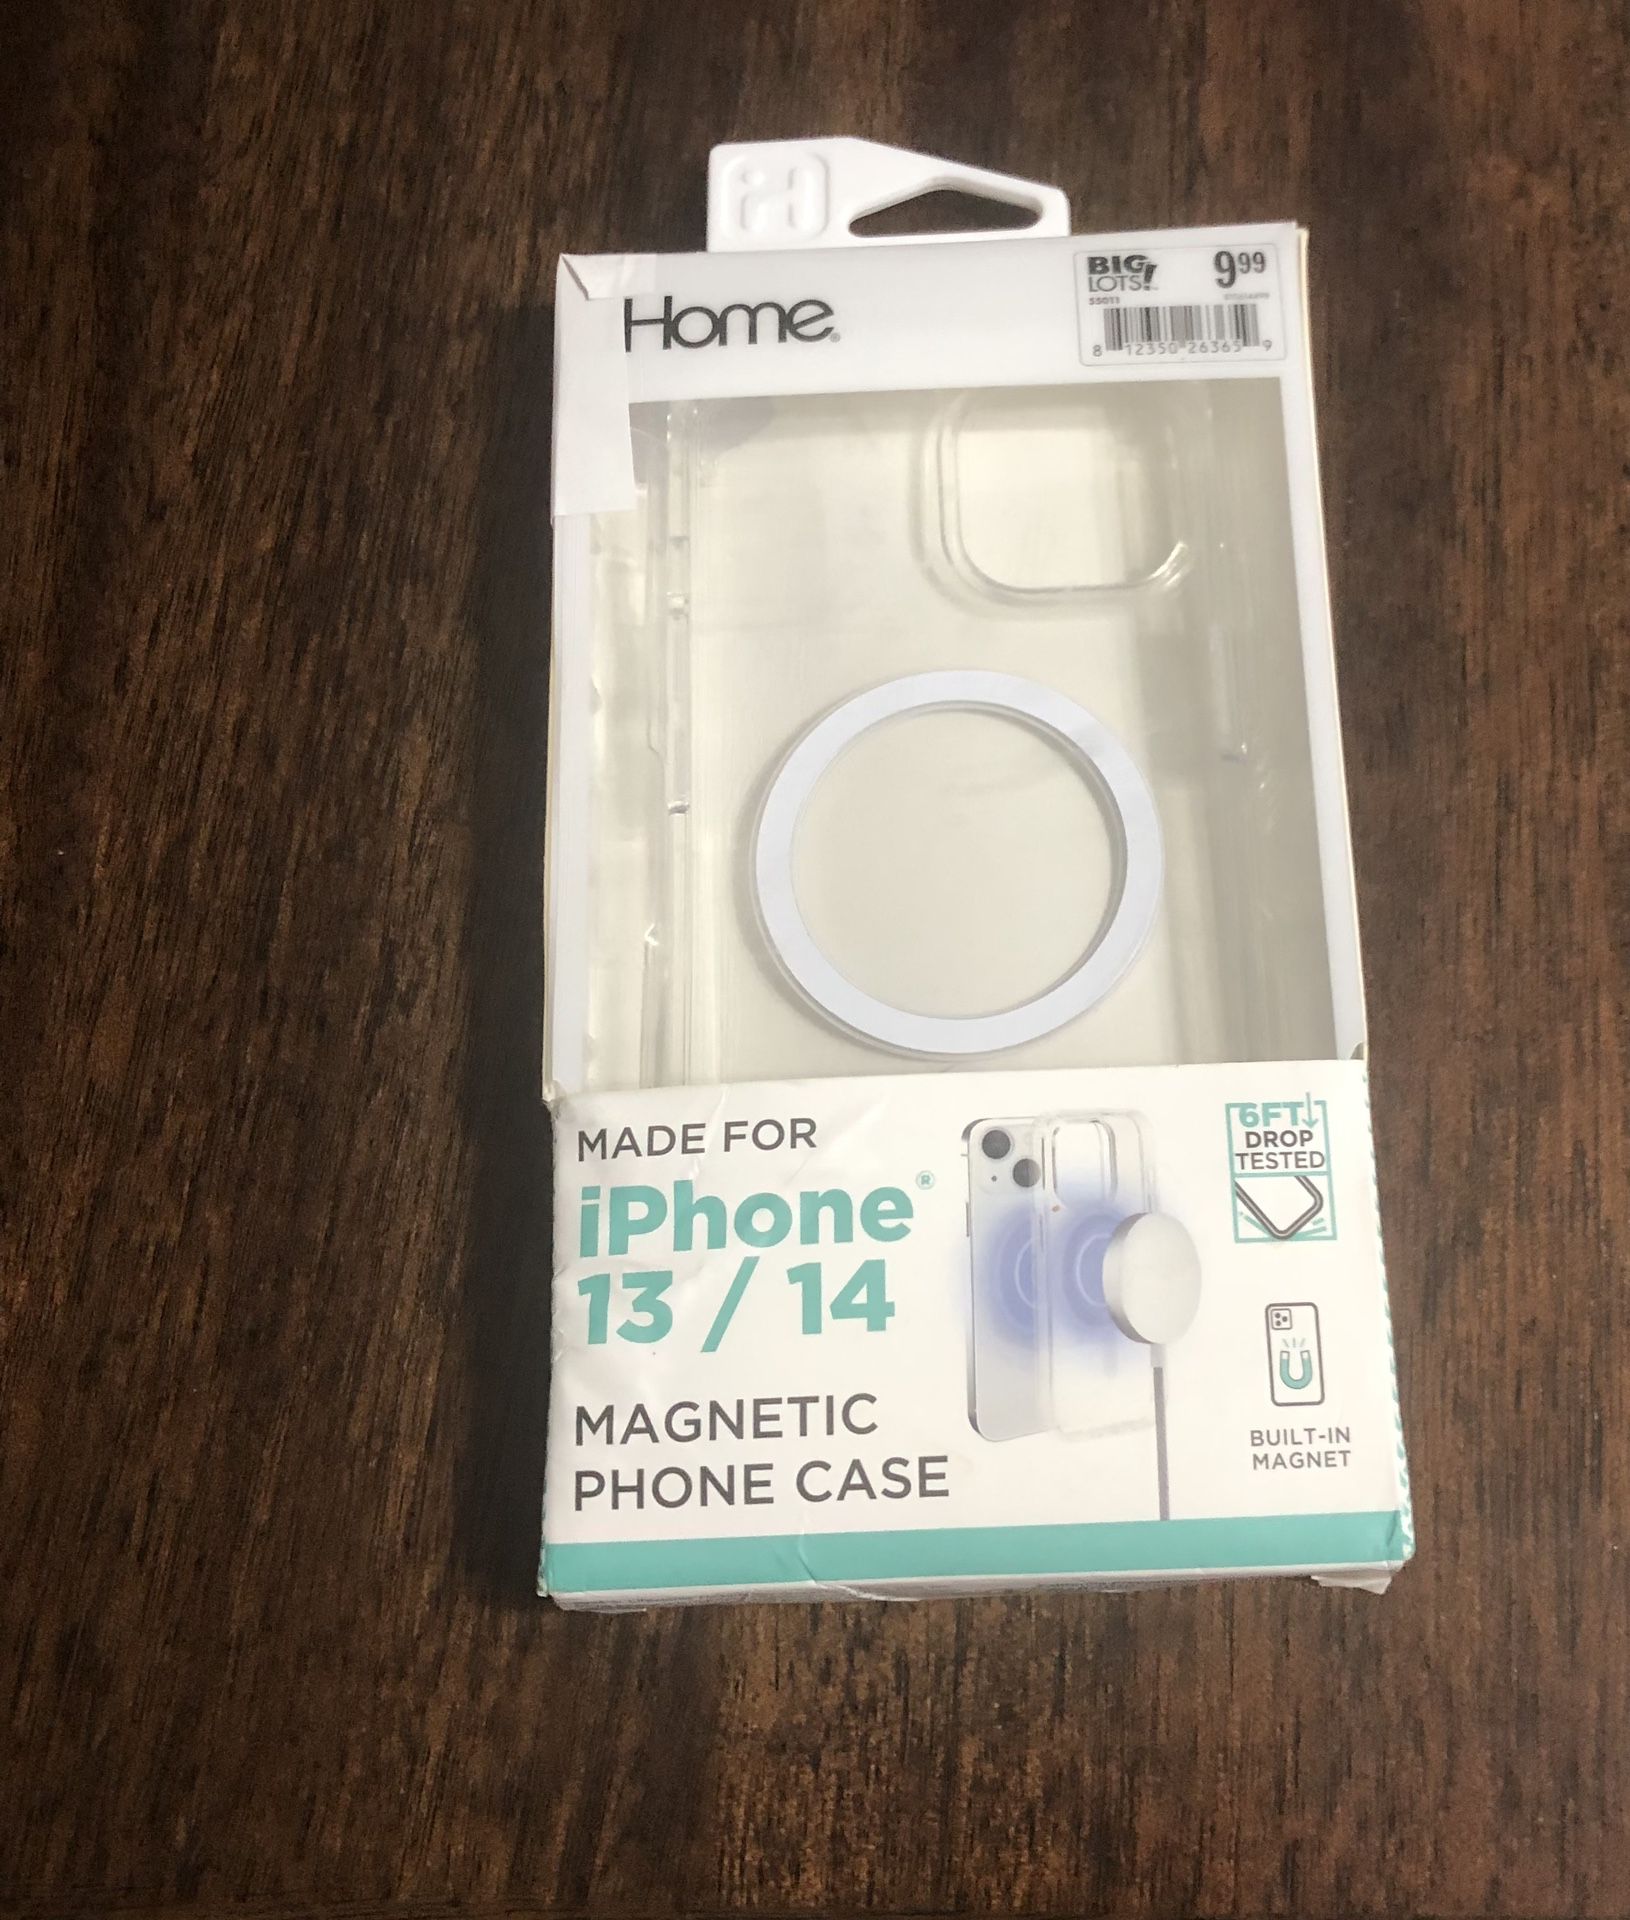 IHome Magnetic phonecase for iPhone 13/14: 6 6ft drop tested, built in magnet, easy access to all the control a features, built in magnets for secure 